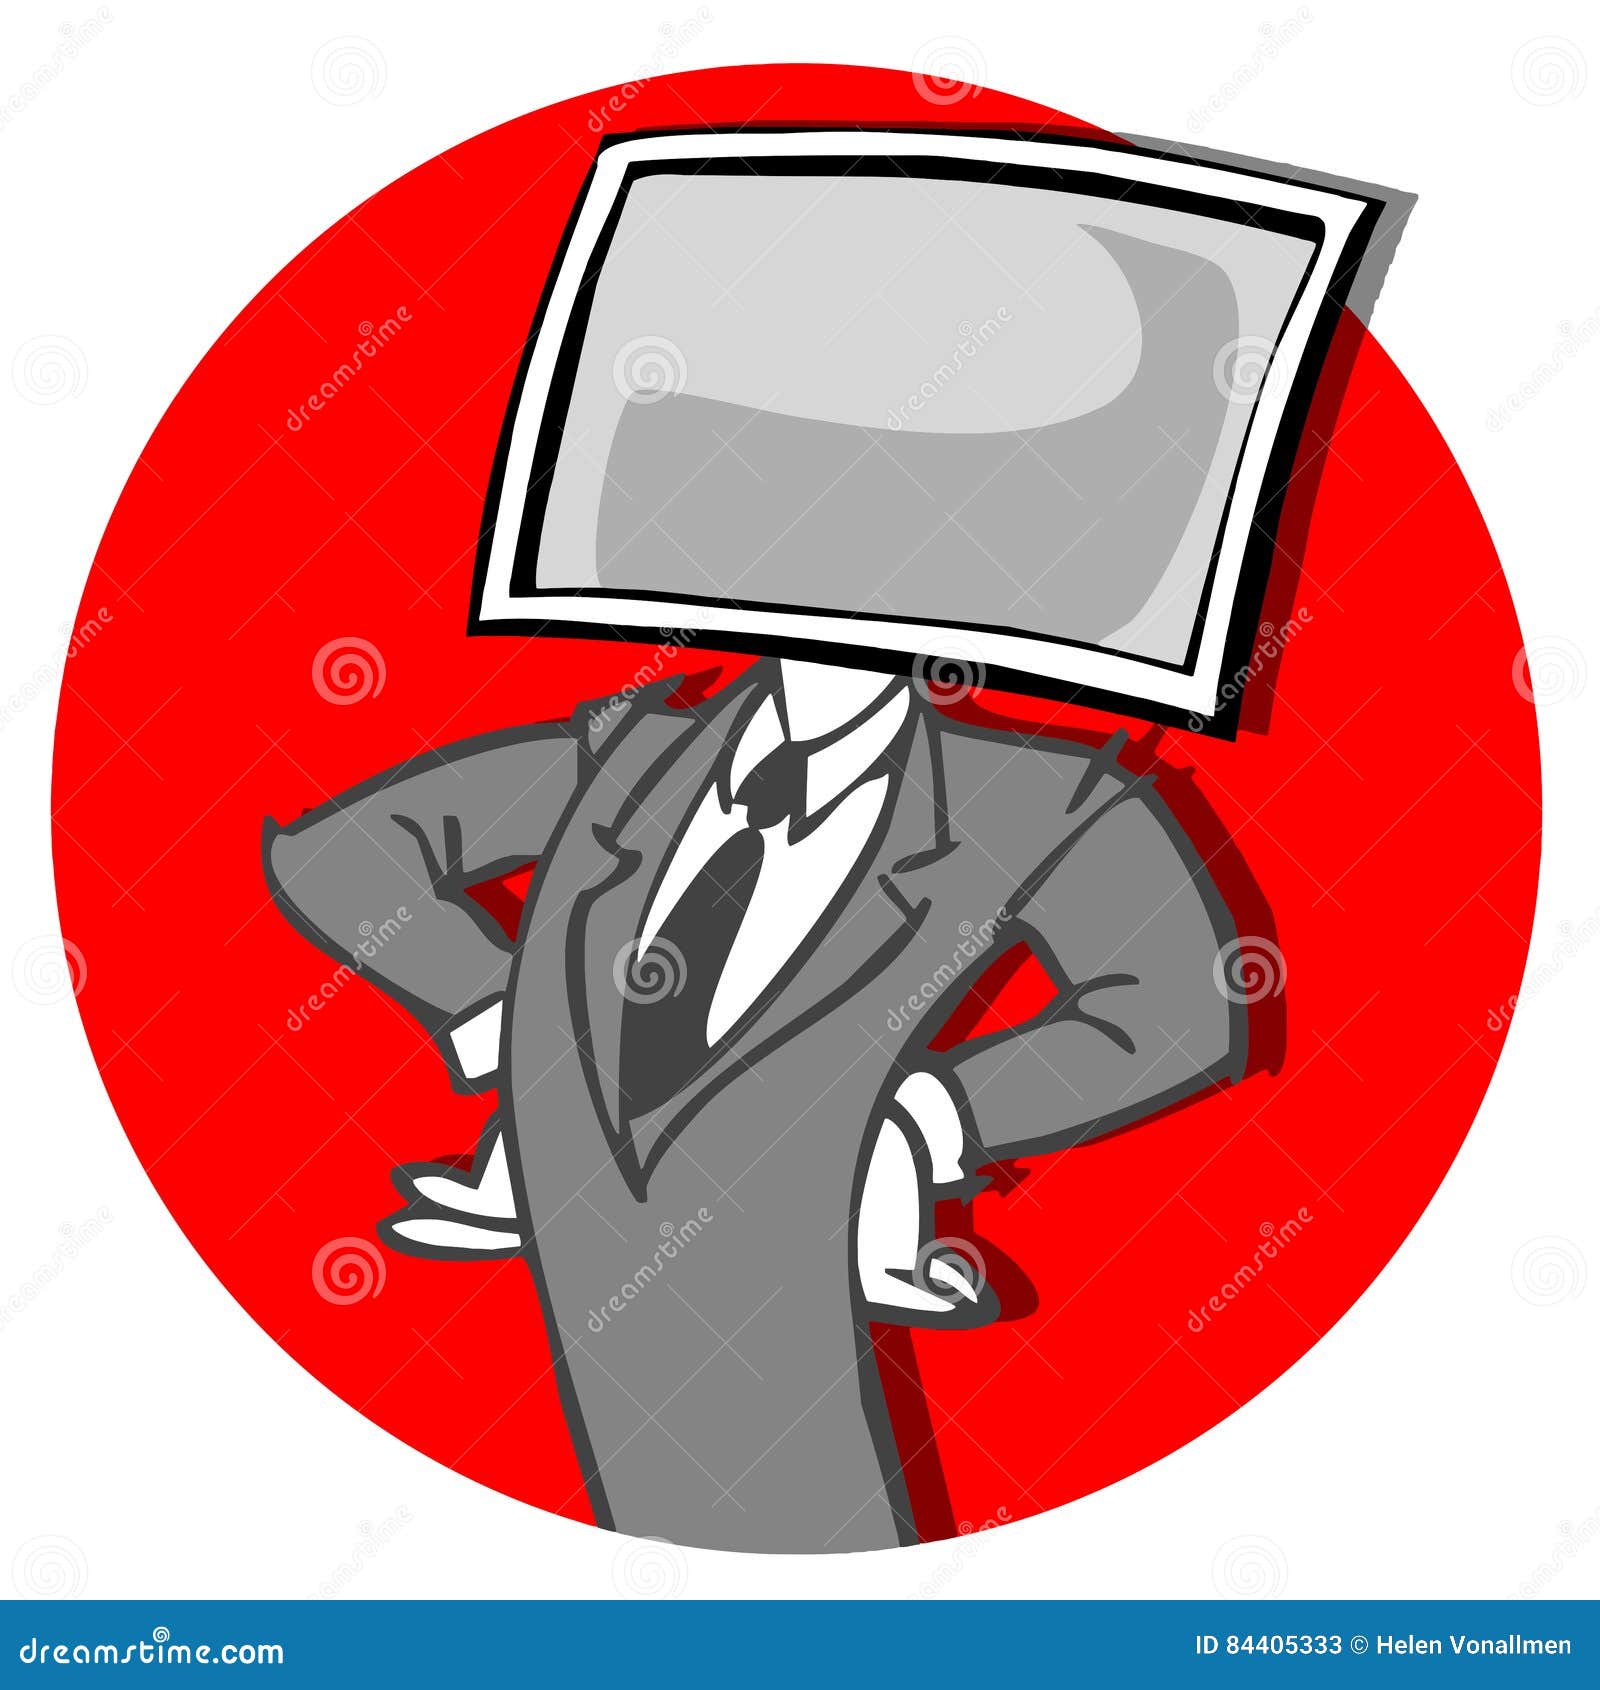 Man with computer face stock vector. Illustration of clipart - 84405333